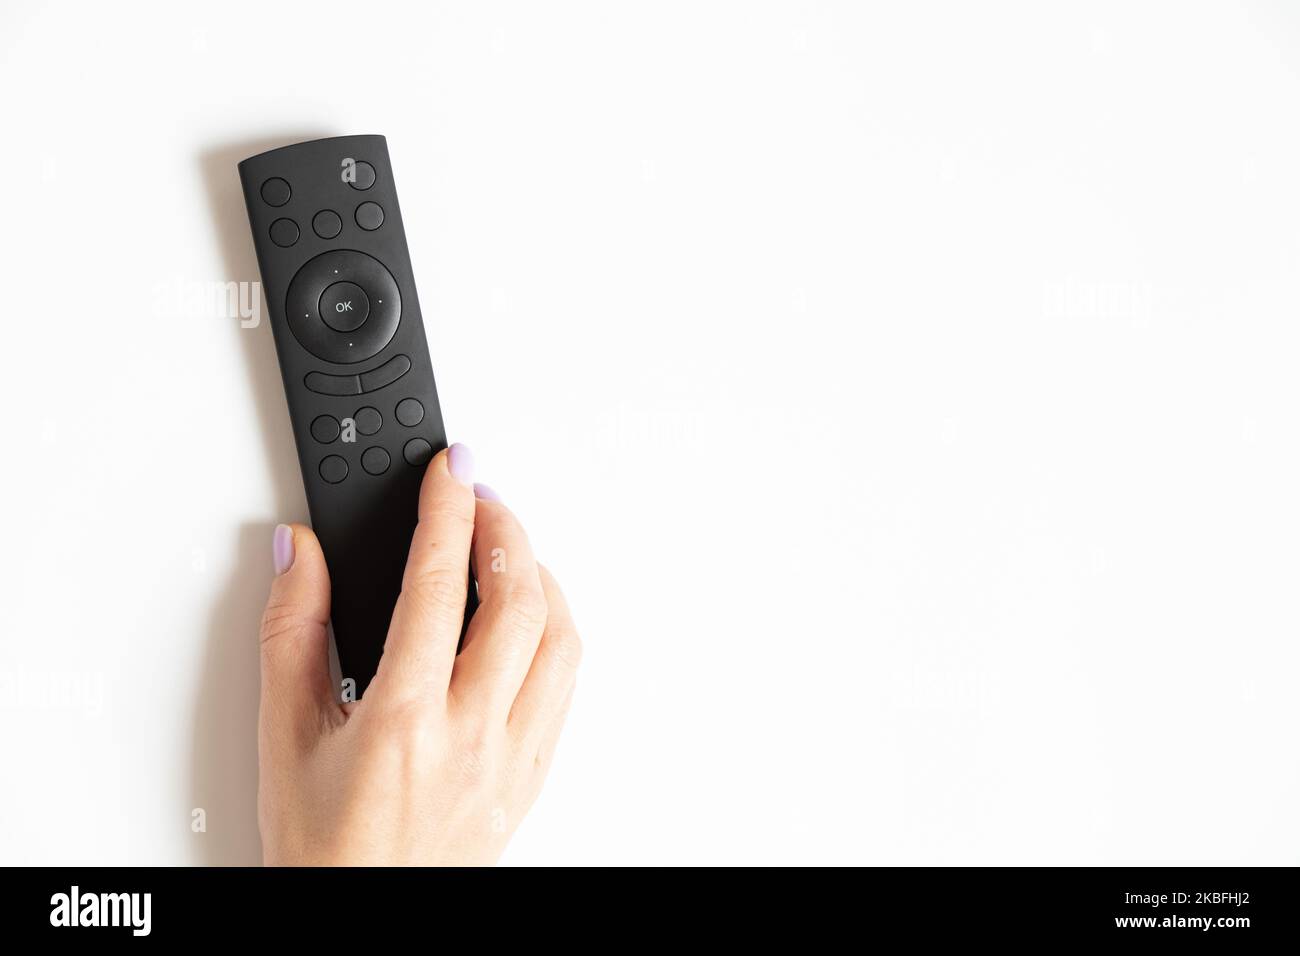 Remote control in a female hand on a white background close-up, TV remote control Stock Photo